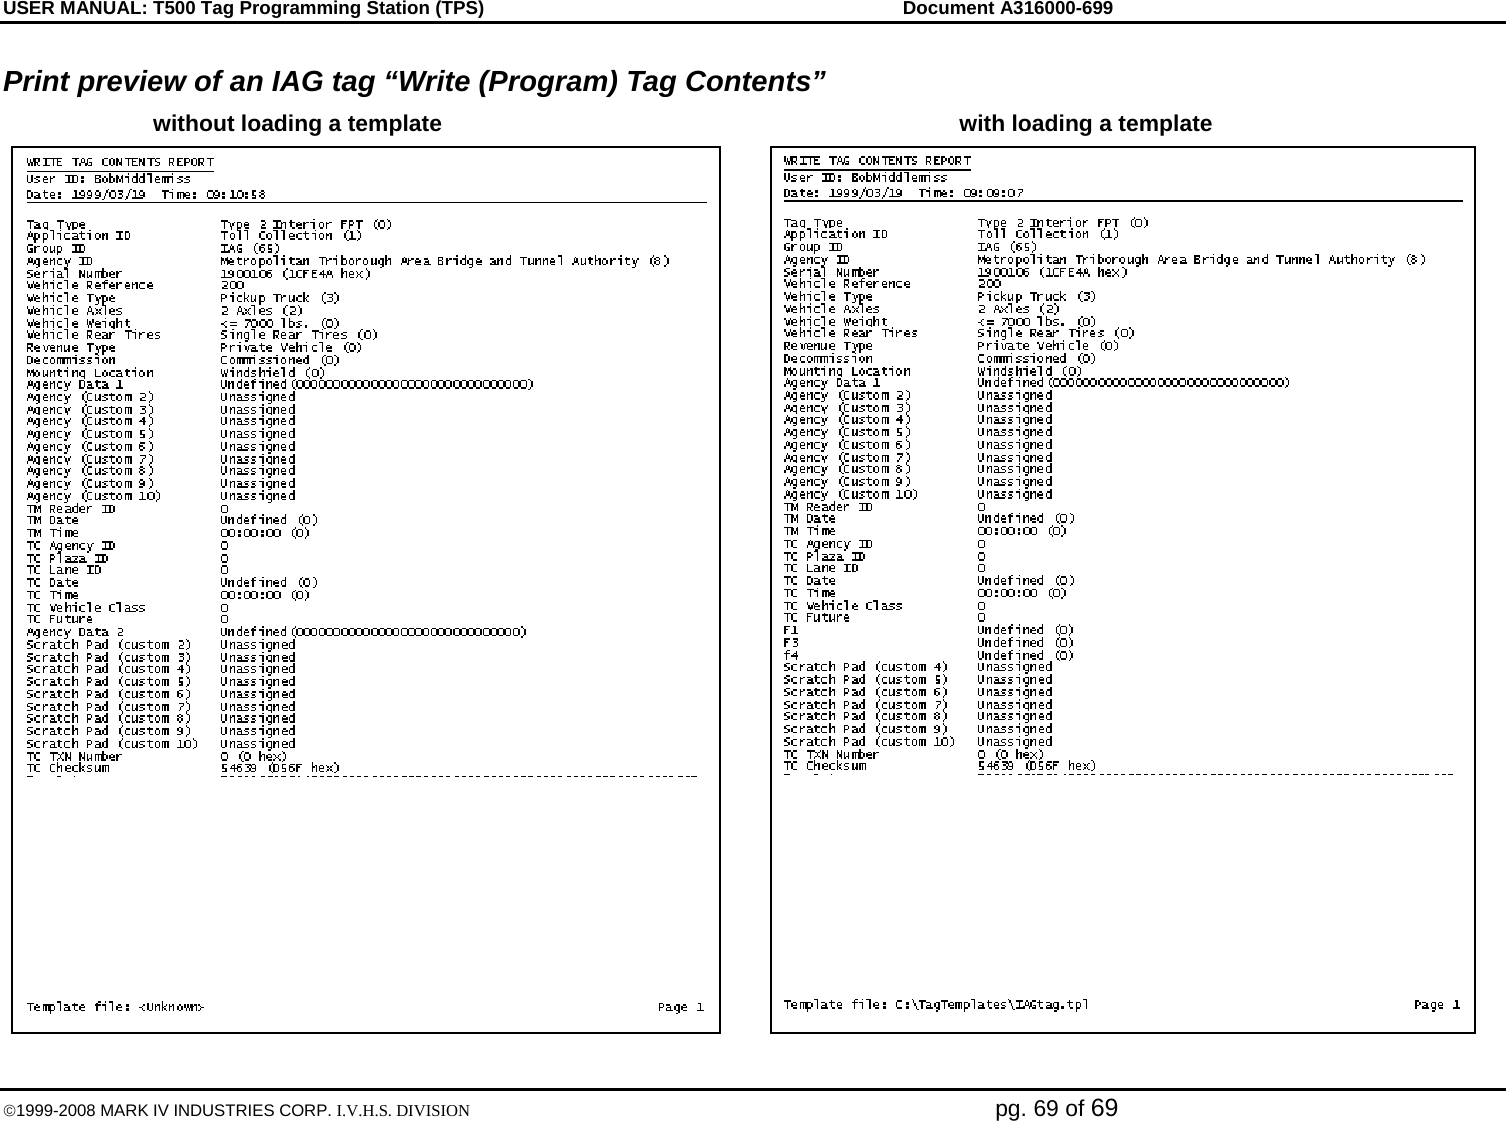 USER MANUAL: T500 Tag Programming Station (TPS)     Document A316000-699  ©1999-2008 MARK IV INDUSTRIES CORP. I.V.H.S. DIVISION   pg. 69 of 69 Print preview of an IAG tag “Write (Program) Tag Contents”  without loading a template  with loading a template   